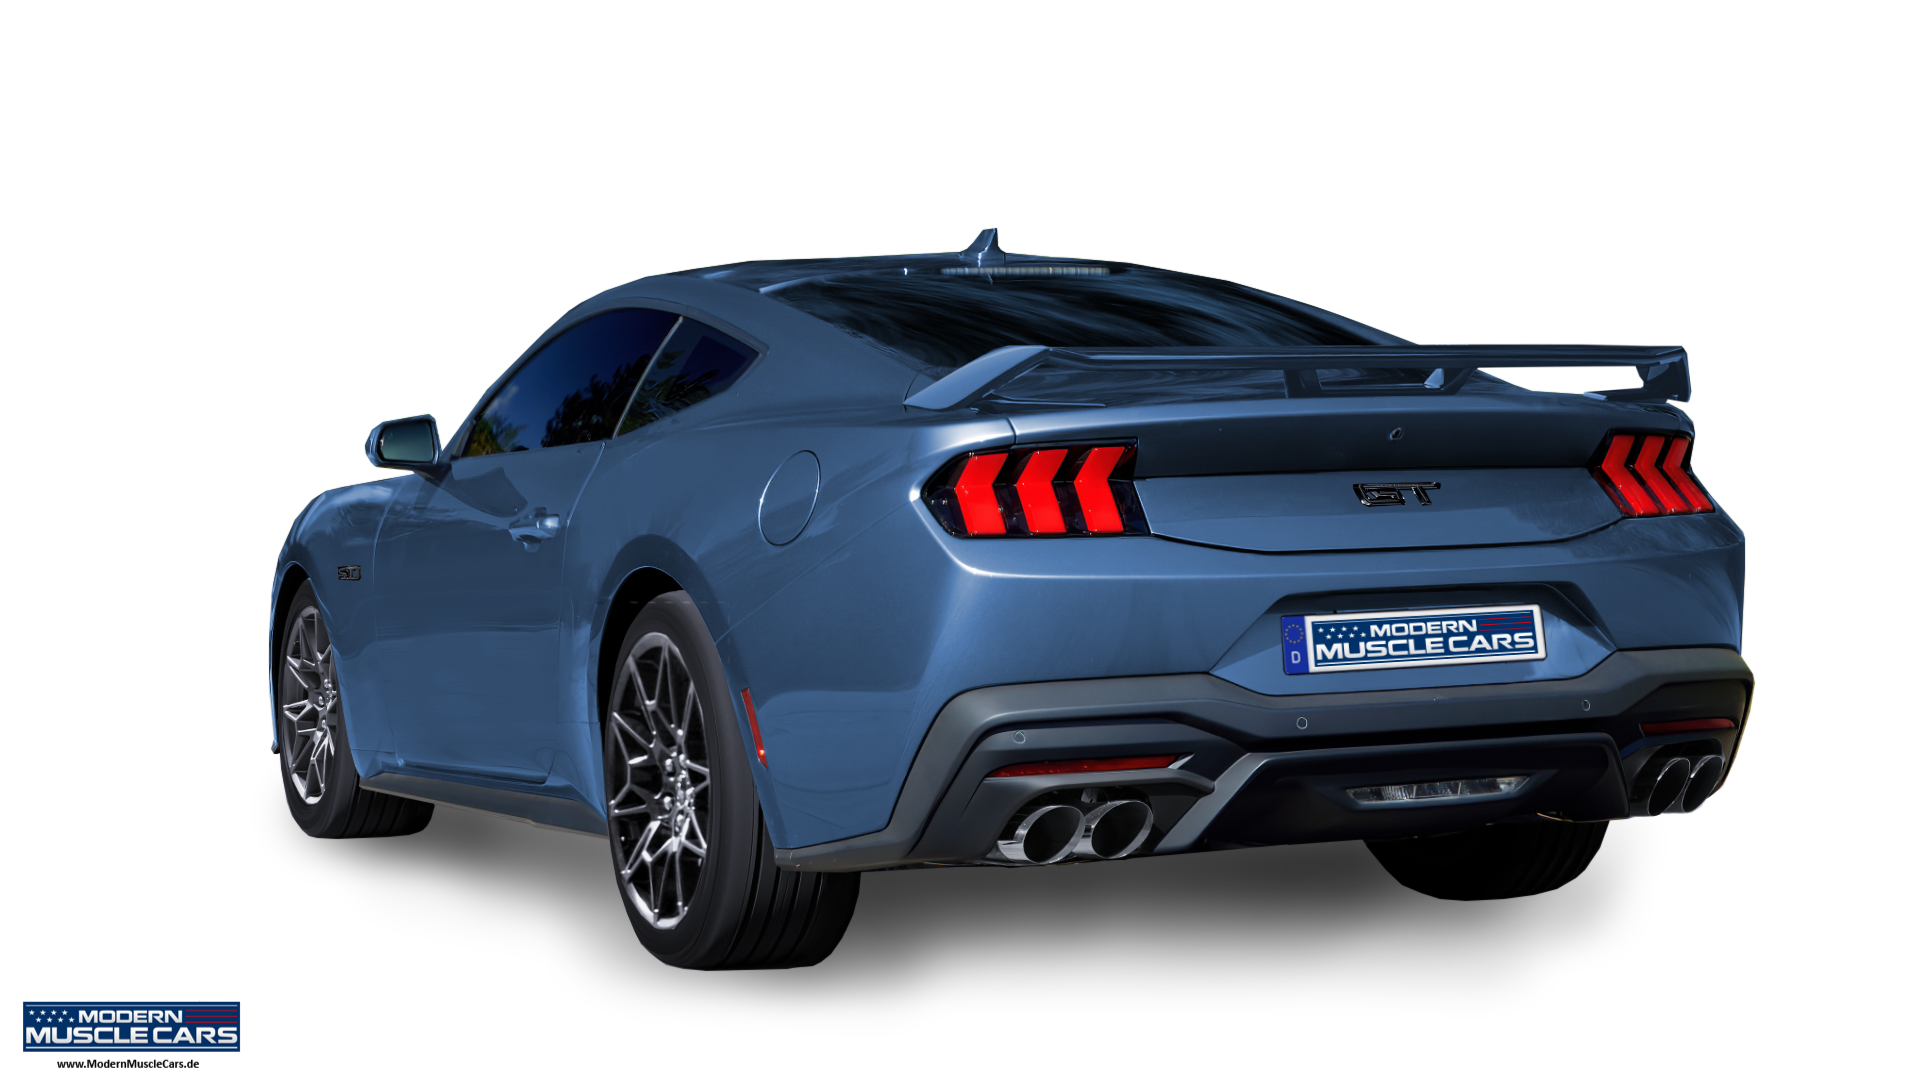 S650 Mustang Share your window sticker backside